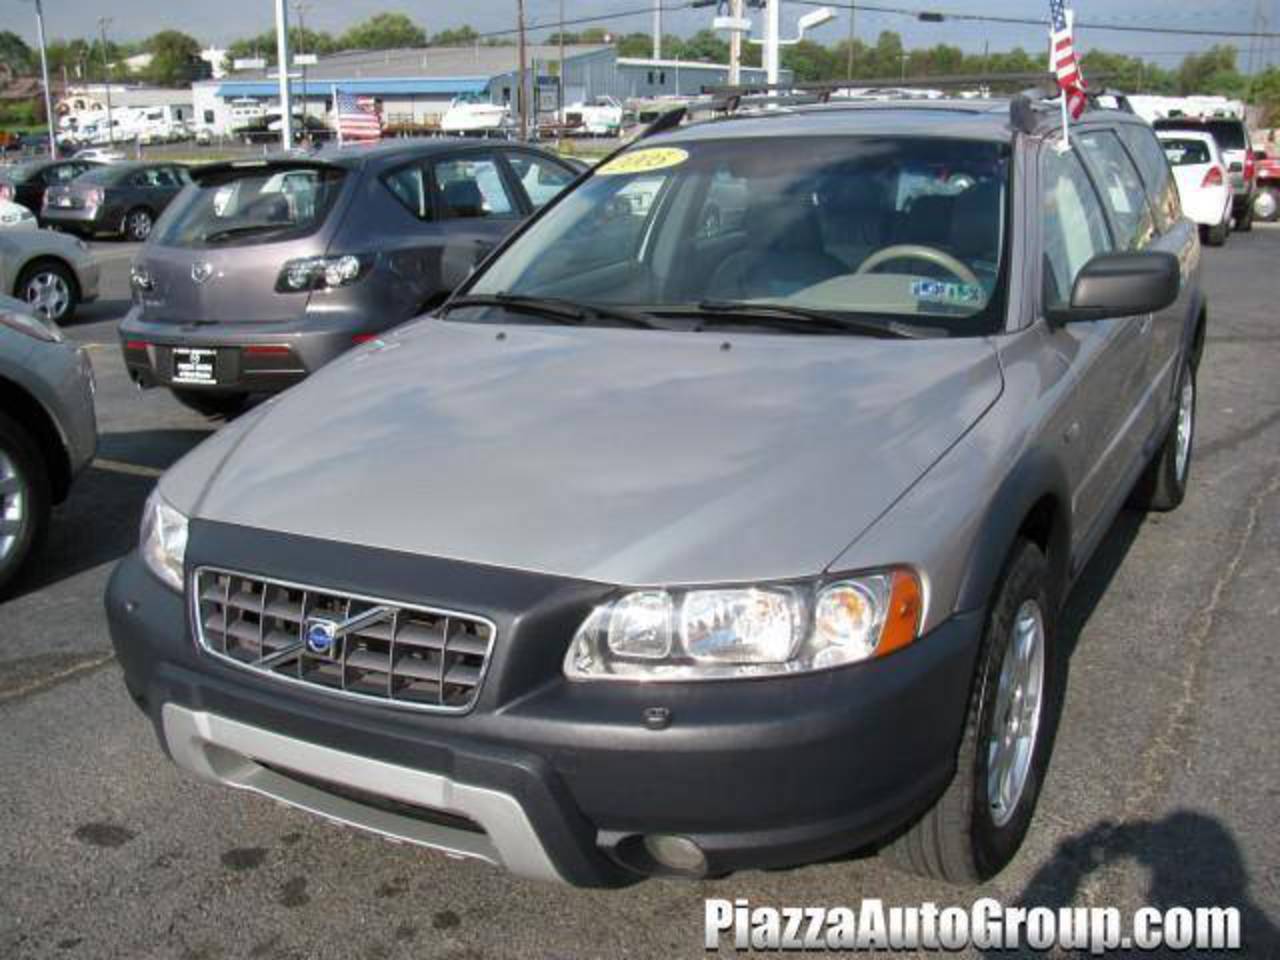 Volvo XC70 Cross Country 25T AWD. View Download Wallpaper. 640x480. Comments